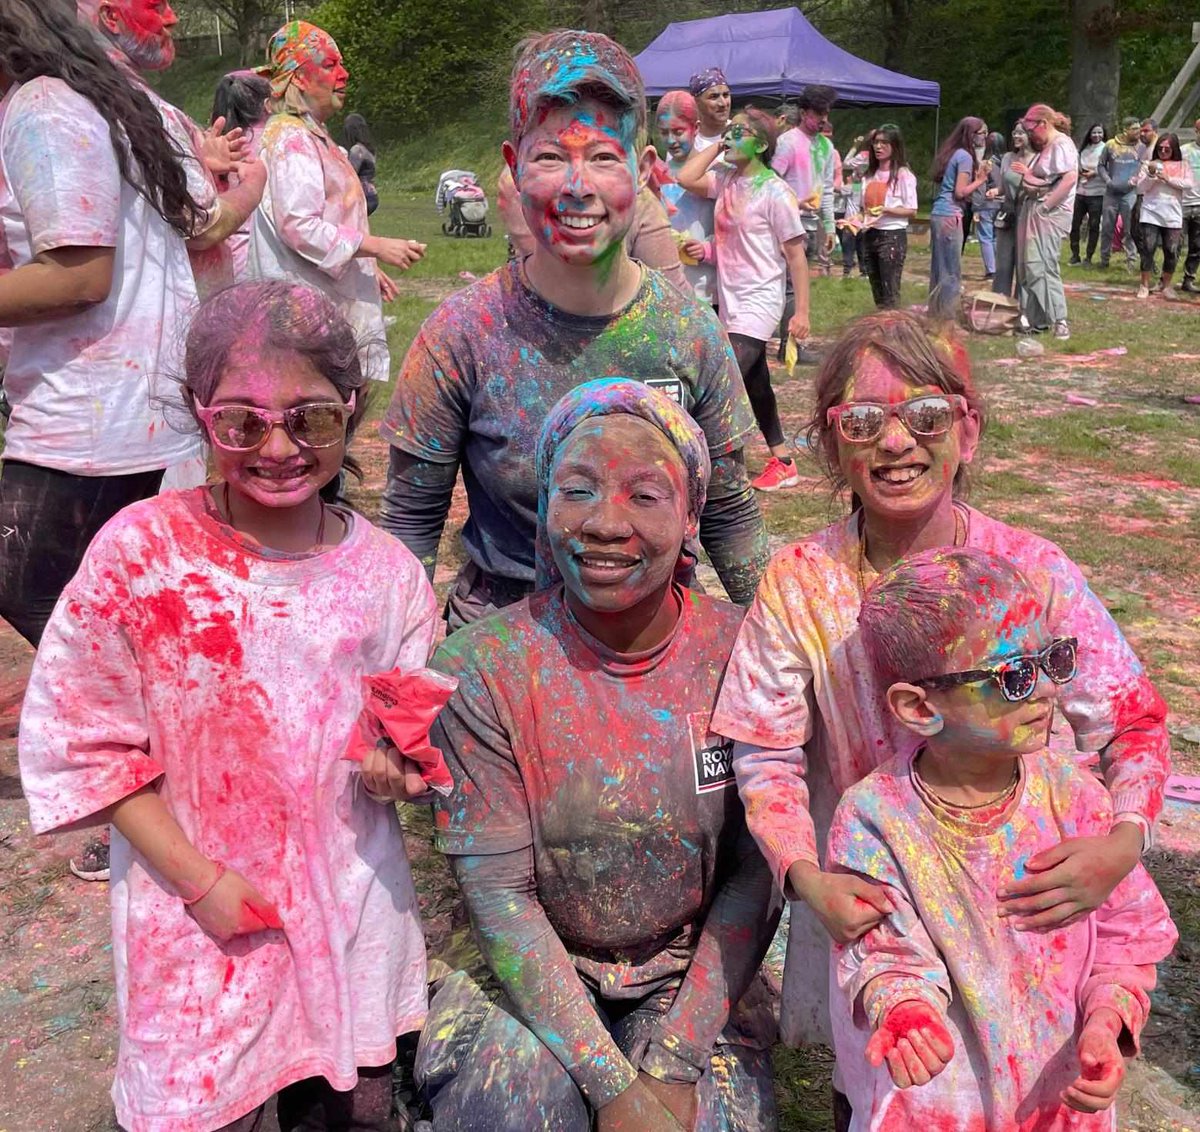 Spring had sprung in #Cardiff as #RNAttract Central celebrated Holi with friends. Much colour, laughter, chaos and fun - Happy #Holi!
@RAdmJudeTerry @BrigjkFraser @DefenceHindu @HCIWales